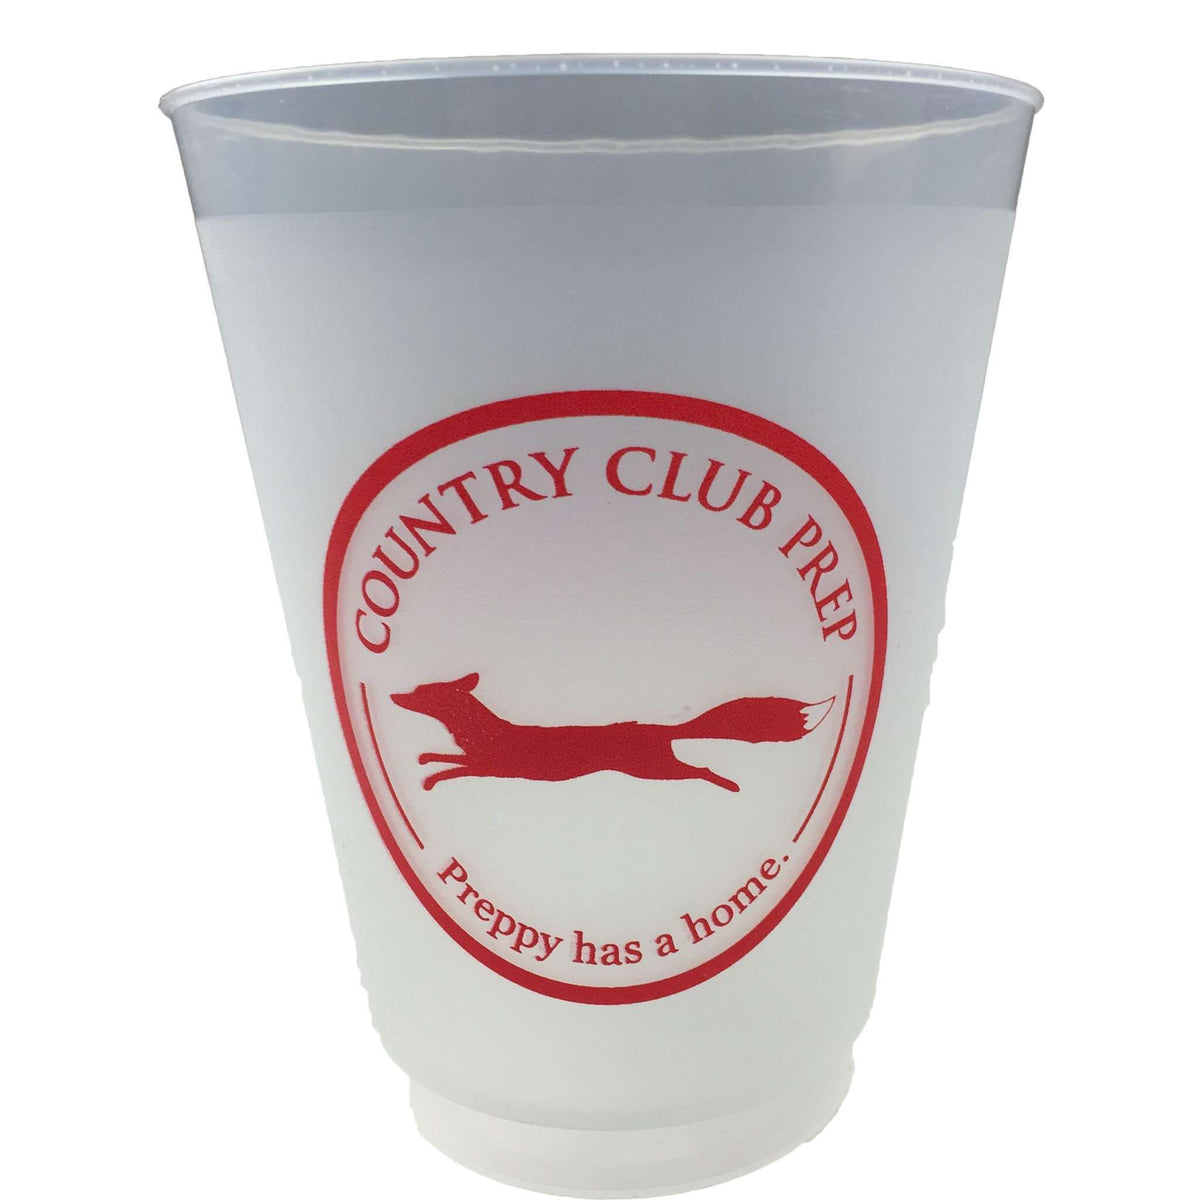 Make America Preppy Again Cups - Set of 12 by Country Club Prep - Country Club Prep